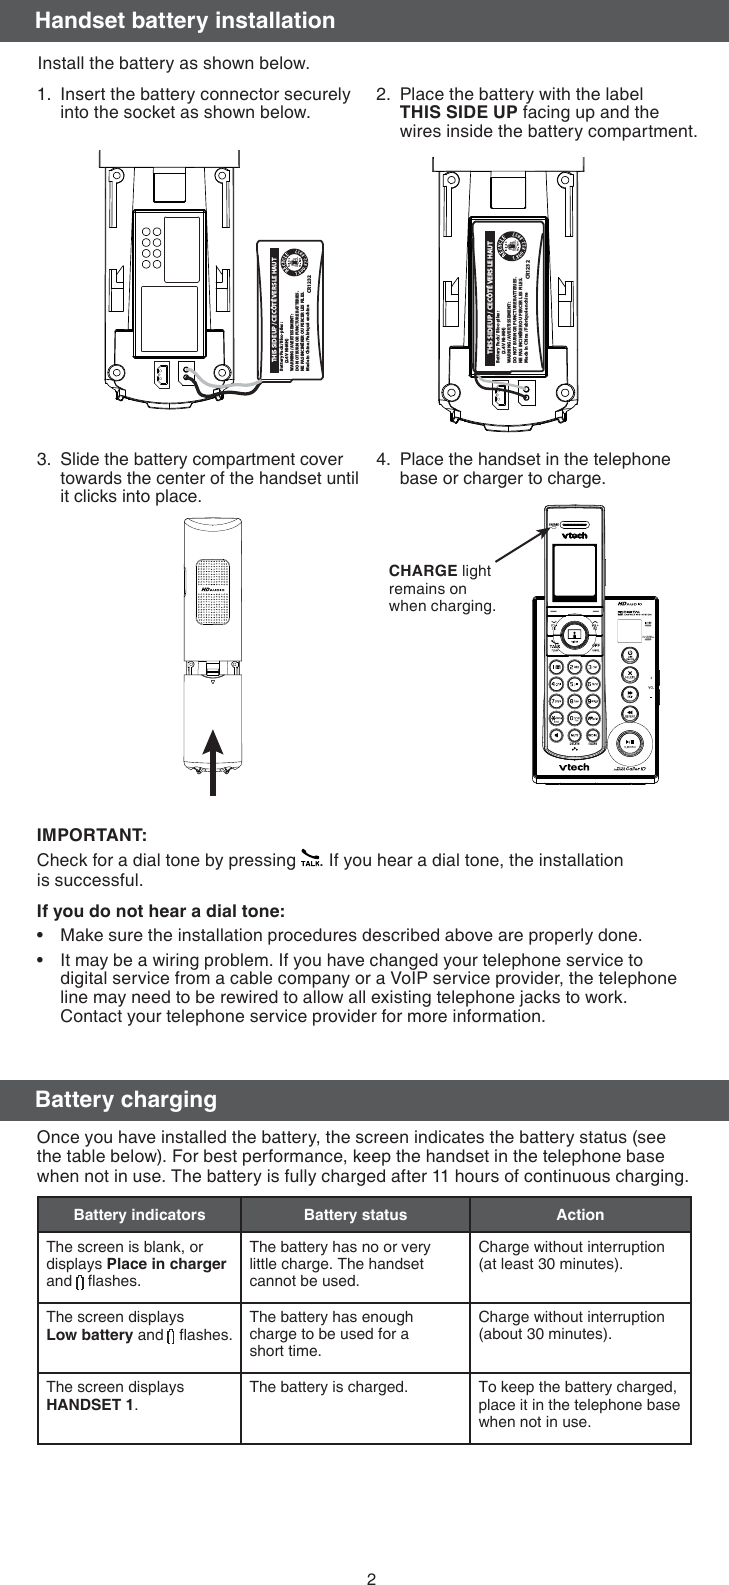 2Install the battery as shown below.Insert the battery connector securely into the socket as shown below.1. Place the battery with the label  THIS SIDE UP facing up and the wires inside the battery compartment.2.Slide the battery compartment cover towards the center of the handset until it clicks into place.3. Place the handset in the telephone base or charger to charge.4.CHARGE light remains on when charging.IMPORTANT:Check for a dial tone by pressing  . If you hear a dial tone, the installation  is successful.If you do not hear a dial tone:Make sure the installation procedures described above are properly done.It may be a wiring problem. If you have changed your telephone service to digital service from a cable company or a VoIP service provider, the telephone line may need to be rewired to allow all existing telephone jacks to work. Contact your telephone service provider for more information.••Battery PackBT164392/BT2643922.4V 550mAh Ni-MHWARNING : DO NOT BURN ORPUNCTURE BATTERIESMade in China                  CR1222Handset battery installationBattery Pack / Bloc-piles : (2.4V Ni-MH)WARNING / AVERTISSEMENT :DO NOT BURN OR PUNCTURE BATTERIES.NE PAS INCINÉRER OU PERCER LES PILES.Made in China / Fabriqué en chine THIS SIDE UP / CE CÔTÉ VERS LE HAUTCR1232Battery Pack / Bloc-piles :  (2.4V Ni-MH)WARNING / AVERTISSEMENT :DO NOT BURN OR PUNCTURE BATTERIES.NE PAS INCINÉRER OU PERCER LES PILES.Made in China / Fabriqué en chine THIS SIDE UP / CE CÔTÉ VERS LE HAUTCR1232Battery chargingOnce you have installed the battery, the screen indicates the battery status (see the table below). For best performance, keep the handset in the telephone base when not in use. The battery is fully charged after 11 hours of continuous charging.Battery indicators Battery status ActionThe screen is blank, or displays Place in charger and   ﬂashes.The battery has no or very little charge. The handset cannot be used.Charge without interruption (at least 30 minutes).The screen displays Low battery and   ﬂashes. The battery has enough charge to be used for a  short time.Charge without interruption (about 30 minutes).The screen displays  HANDSET 1.The battery is charged. To keep the battery charged, place it in the telephone base when not in use.